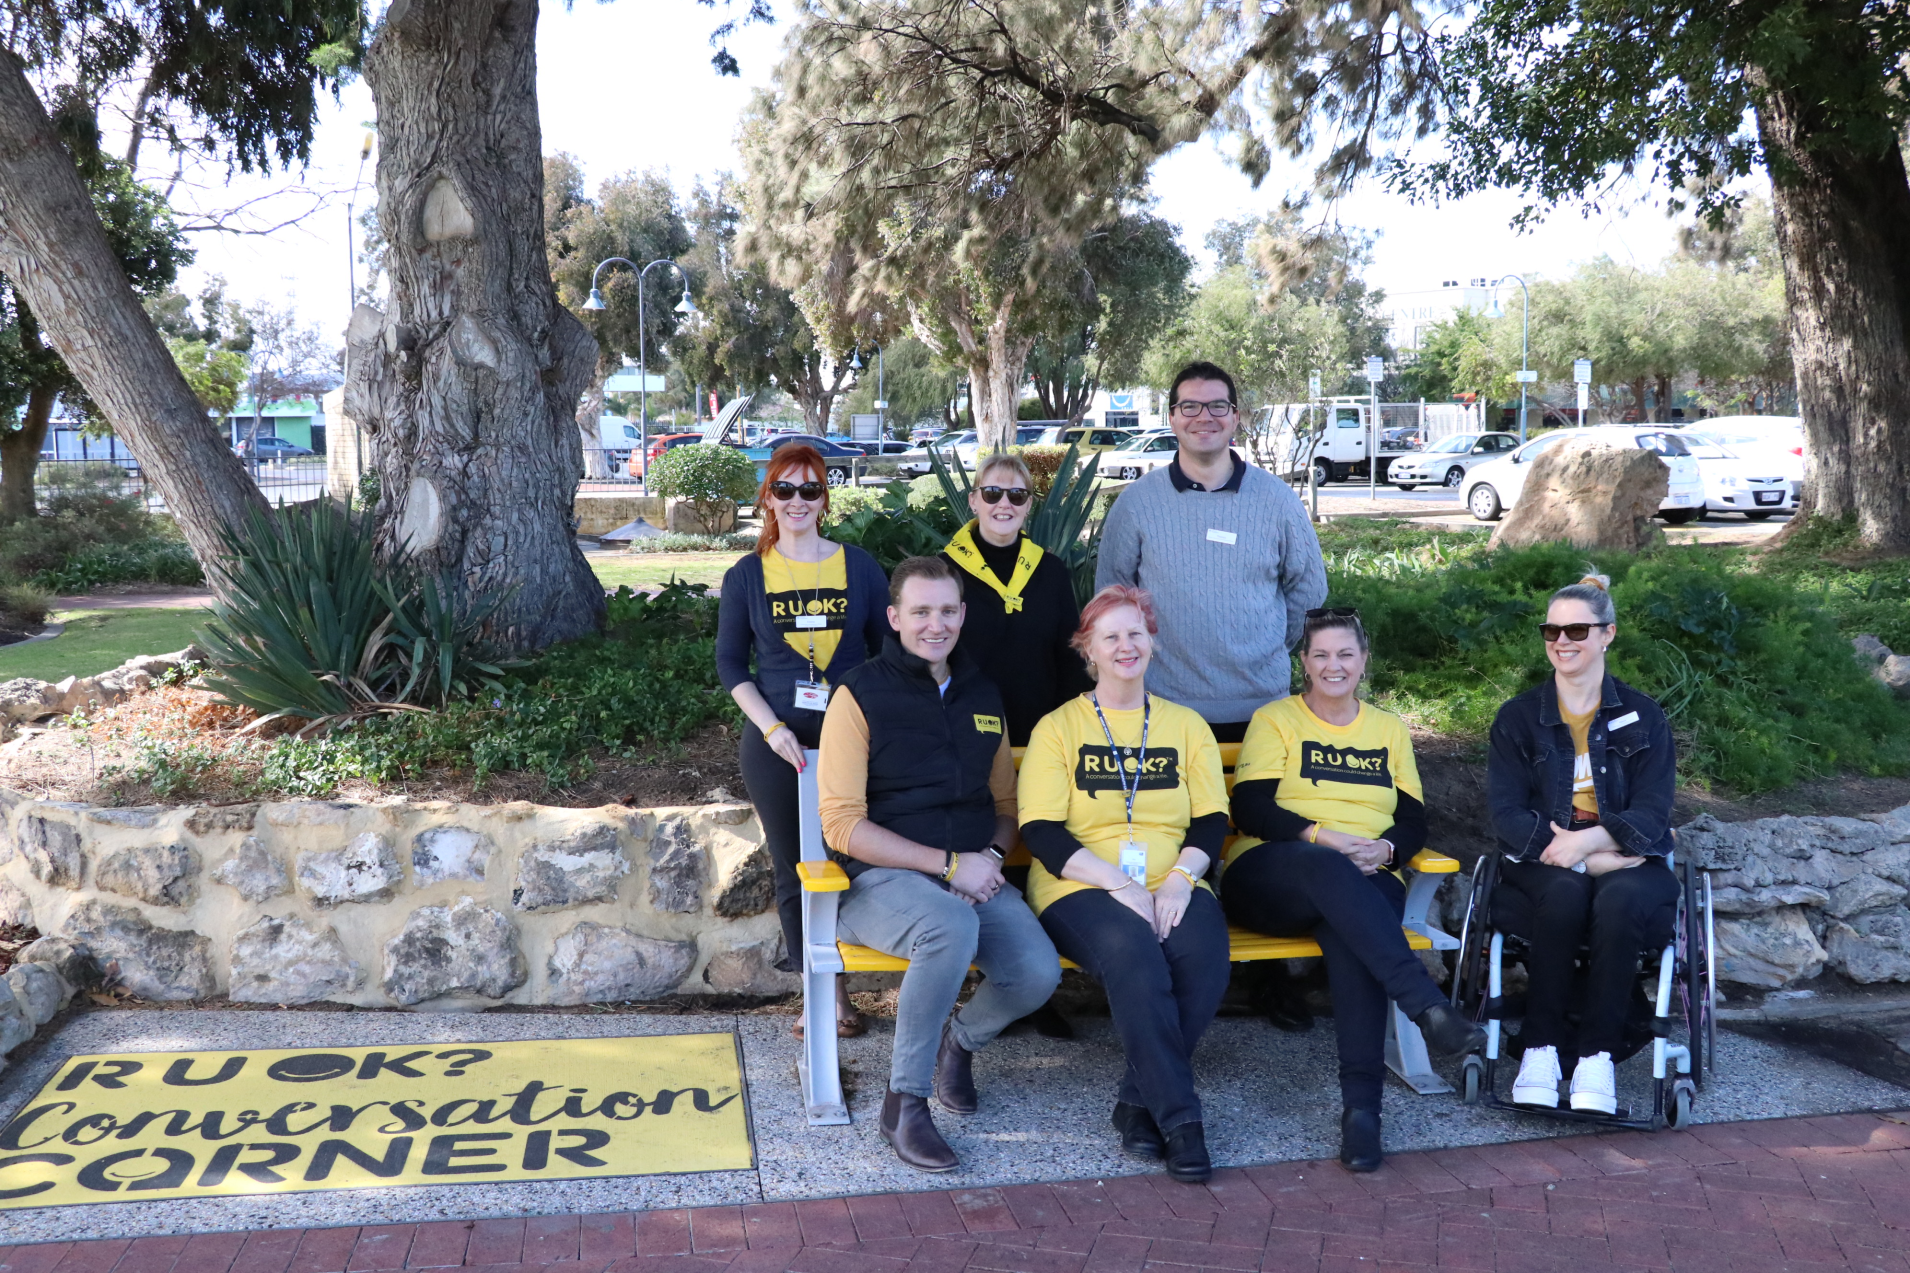 A group of people seated on and around the yellow bench in the park